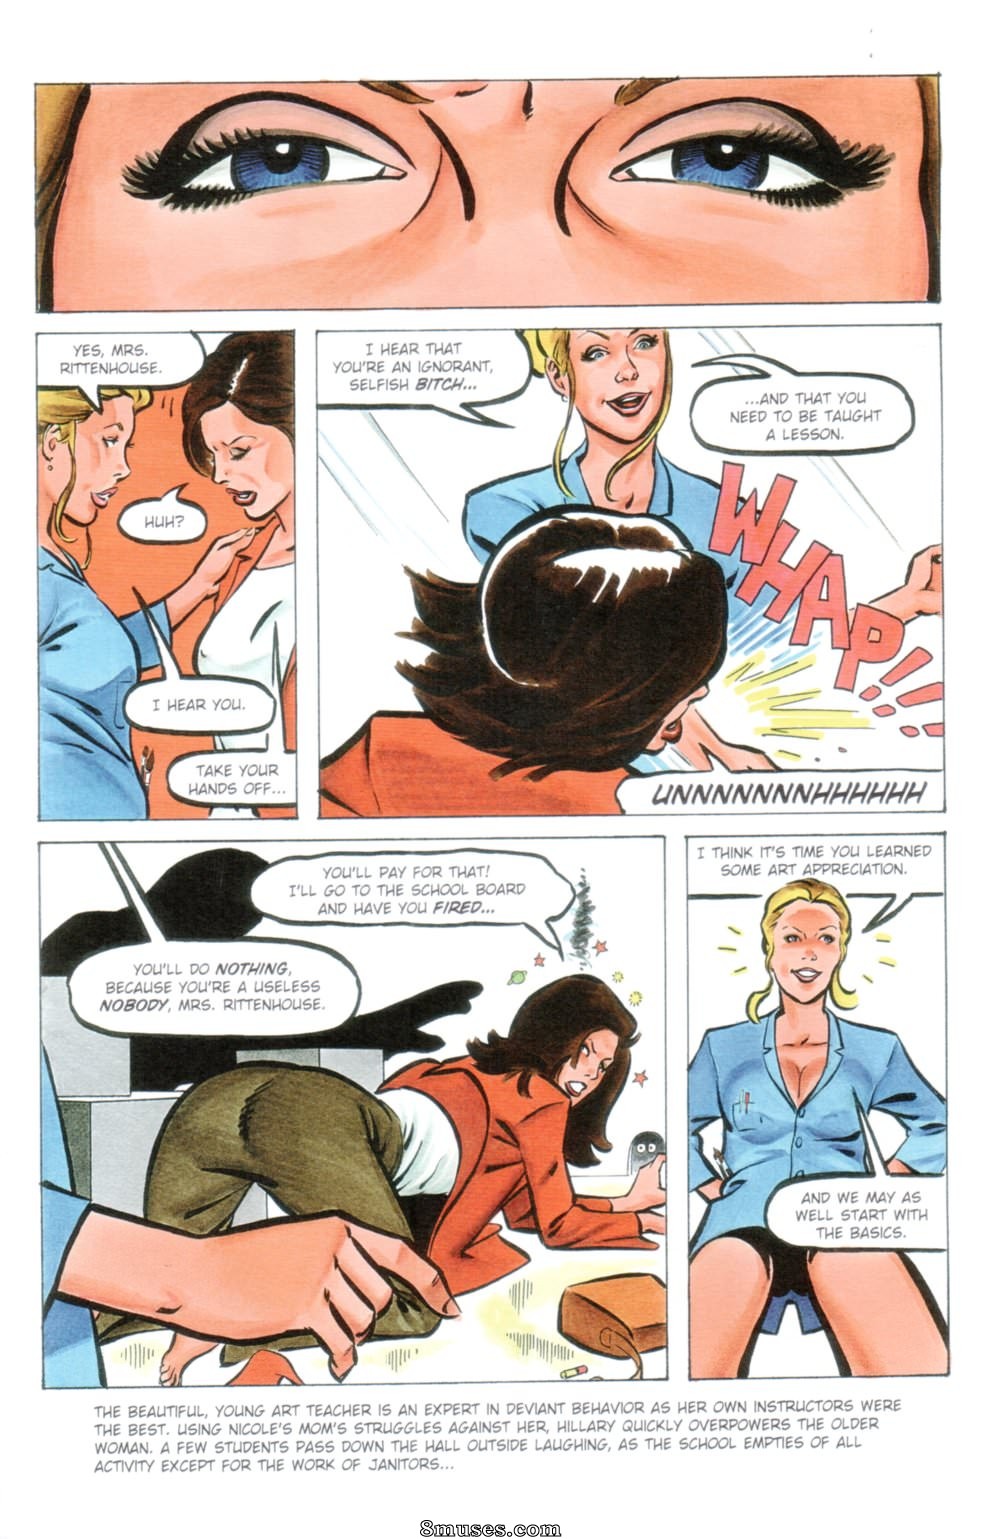 Housewives at Play - The Series Issue 16 - 8muses Comics